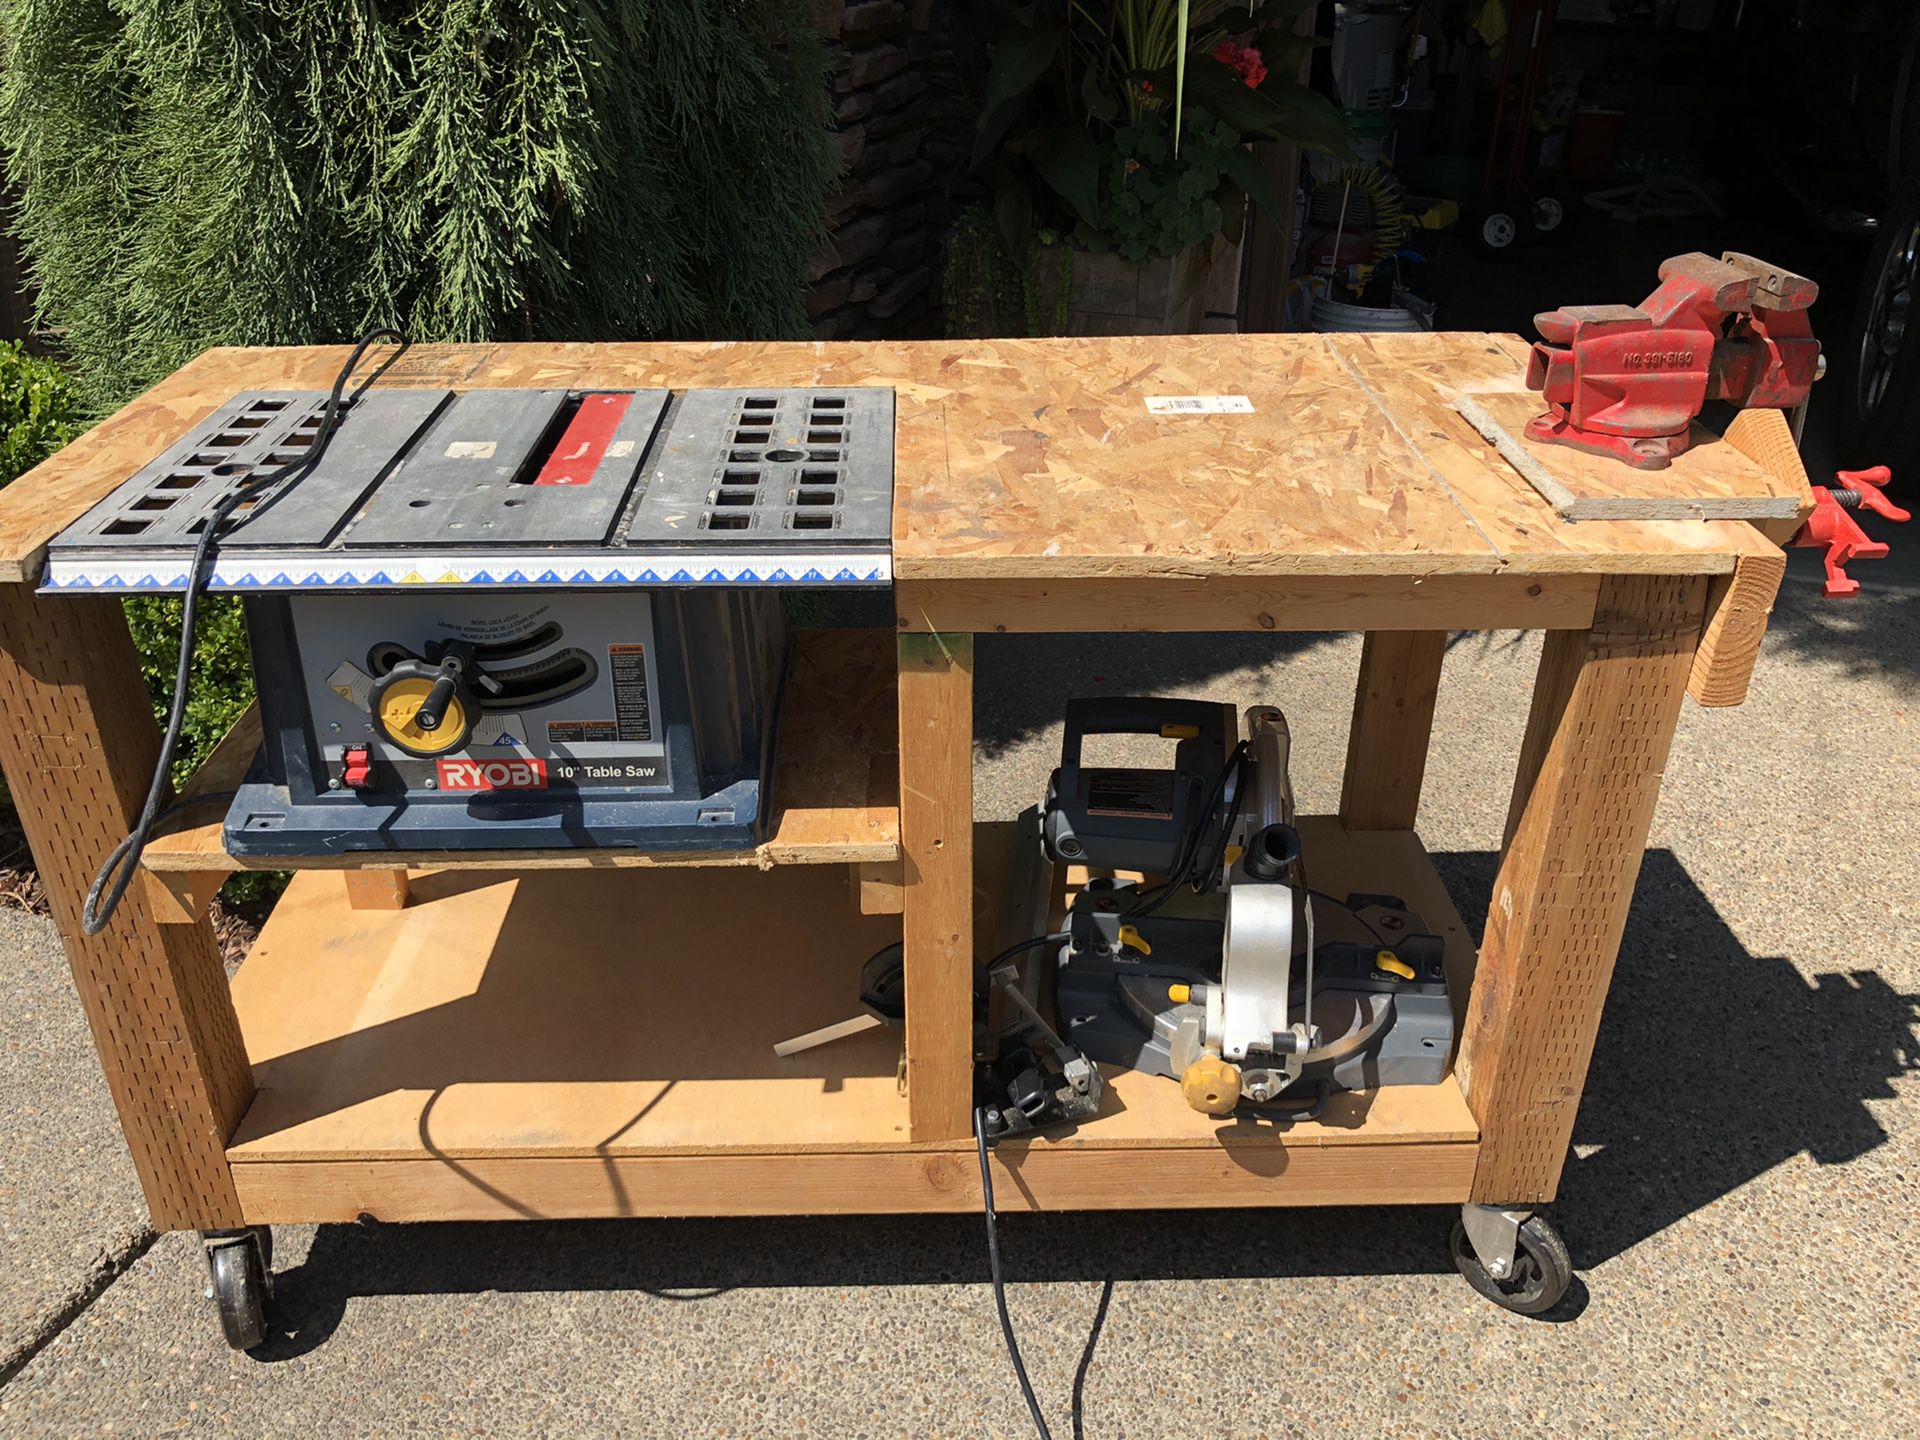 Table saw, chop saw, and working table all together